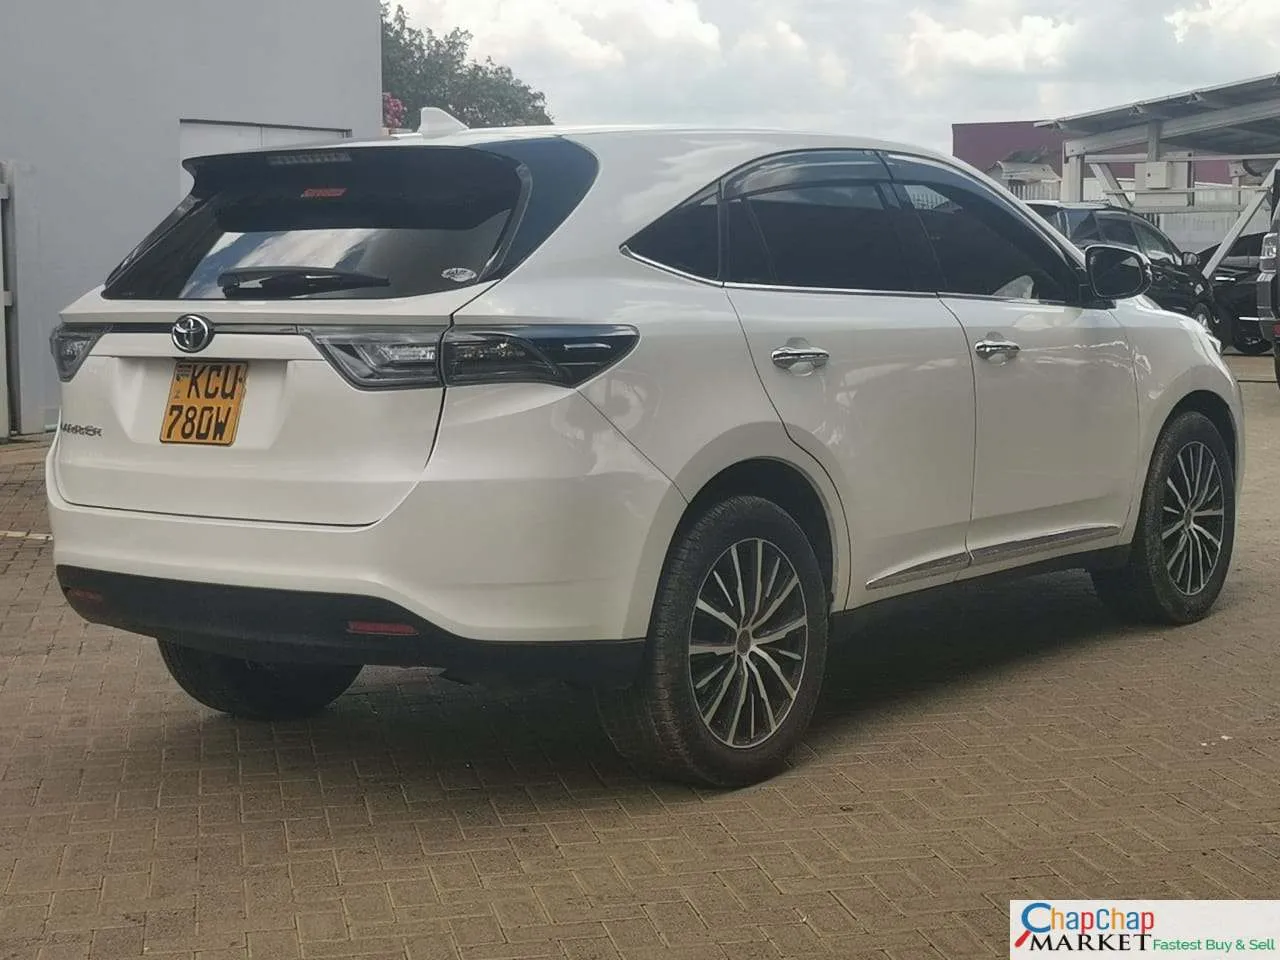 Cars Cars For Sale/Vehicles-Toyota Harrier 🔥 CHEAPEST You Pay 30% Deposit Trade in OK EXCLUSIVE 9